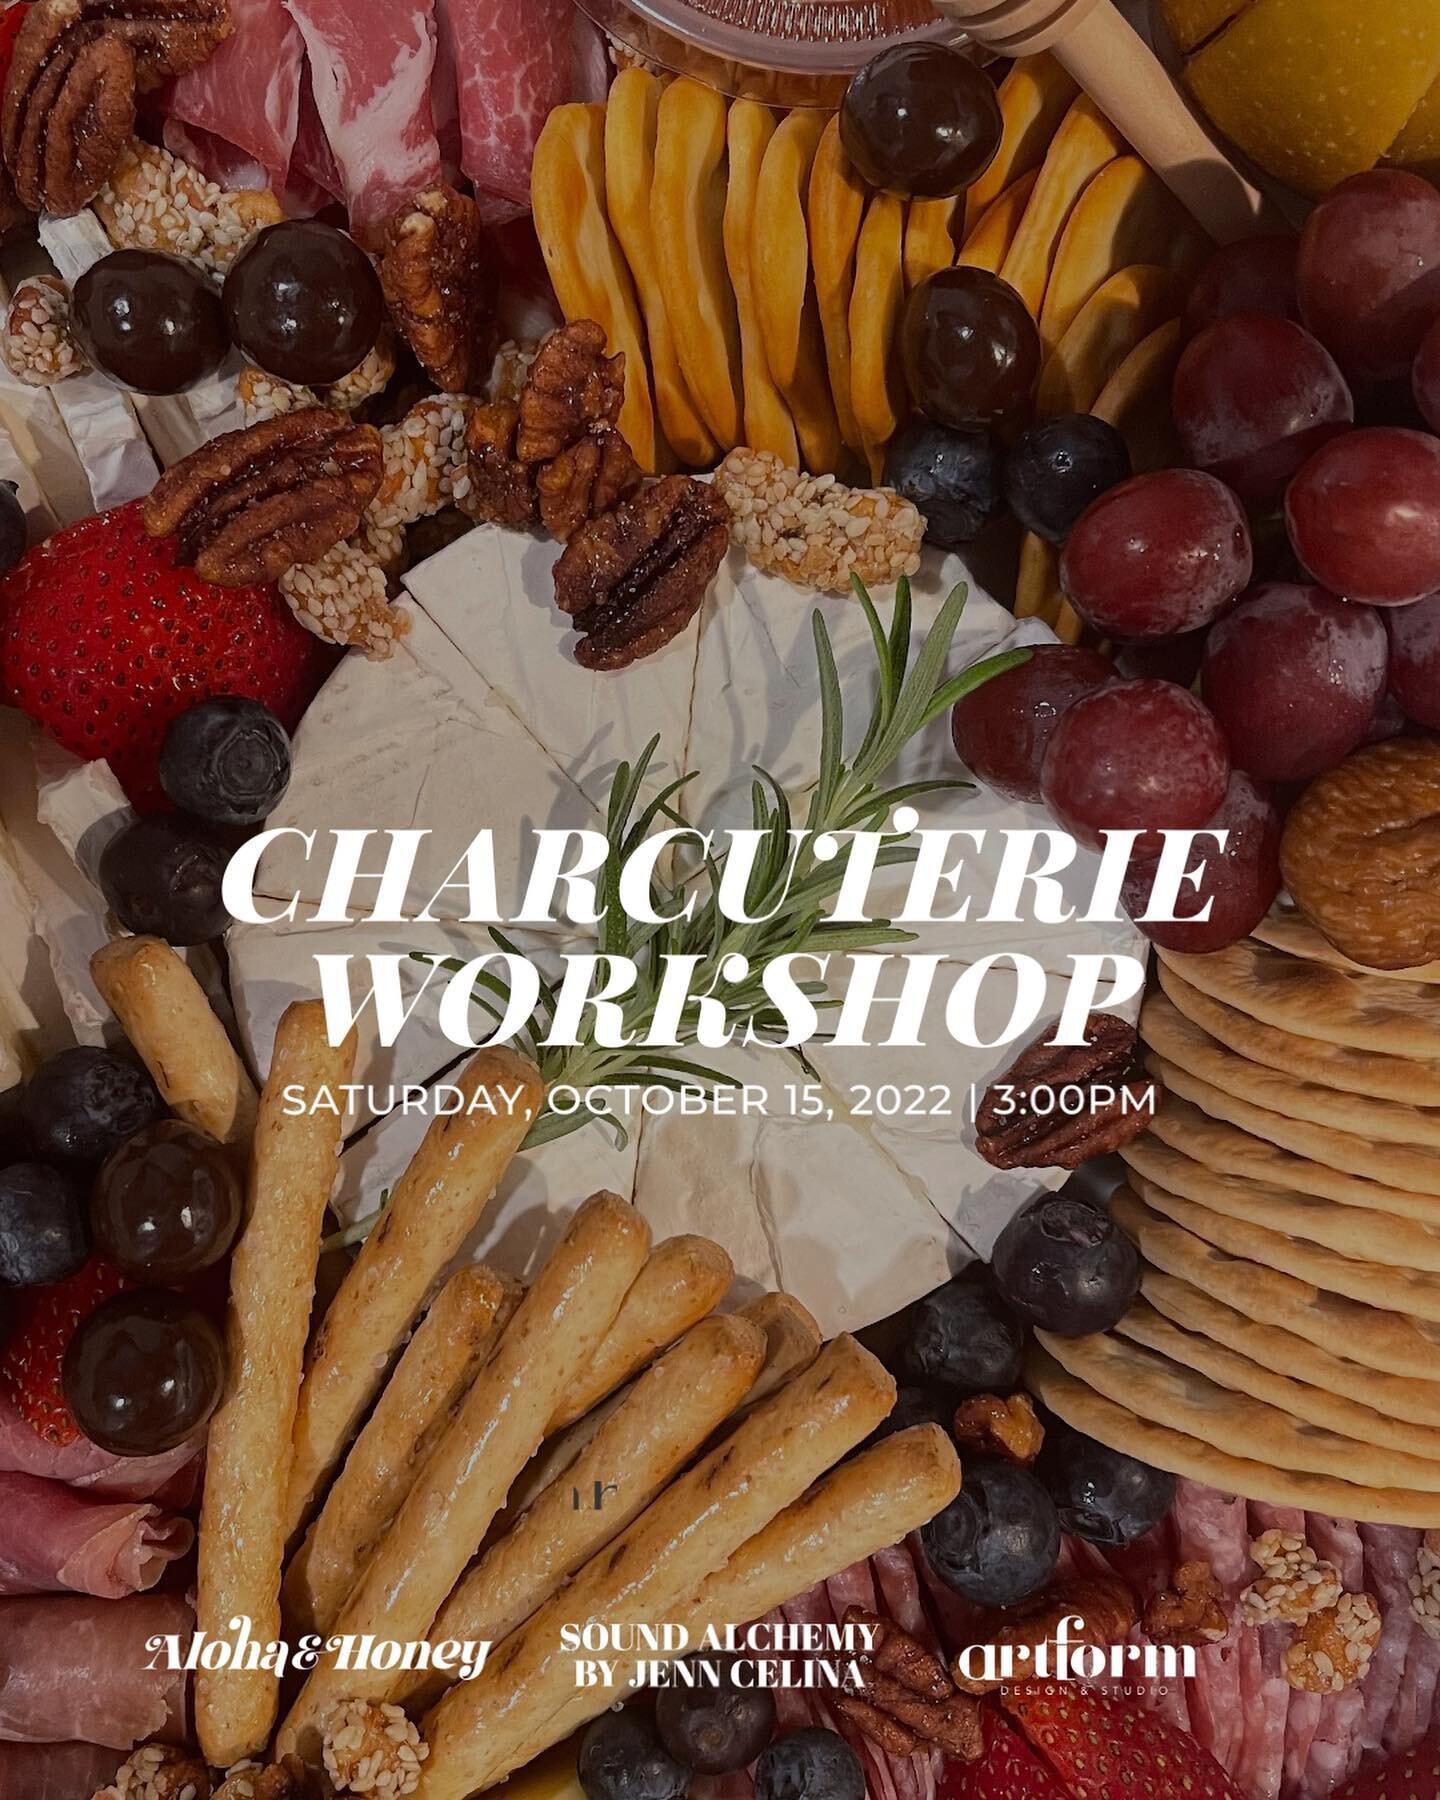 Gather up your besties, we&rsquo;re having a charcuterie workshop! 

@alohaandhoney x Sound Alchemy by @jenncelina first exclusive collaboration located at our friend&rsquo;s over at the @artformdesignstudio 

Link in bio for all the details.

Space 